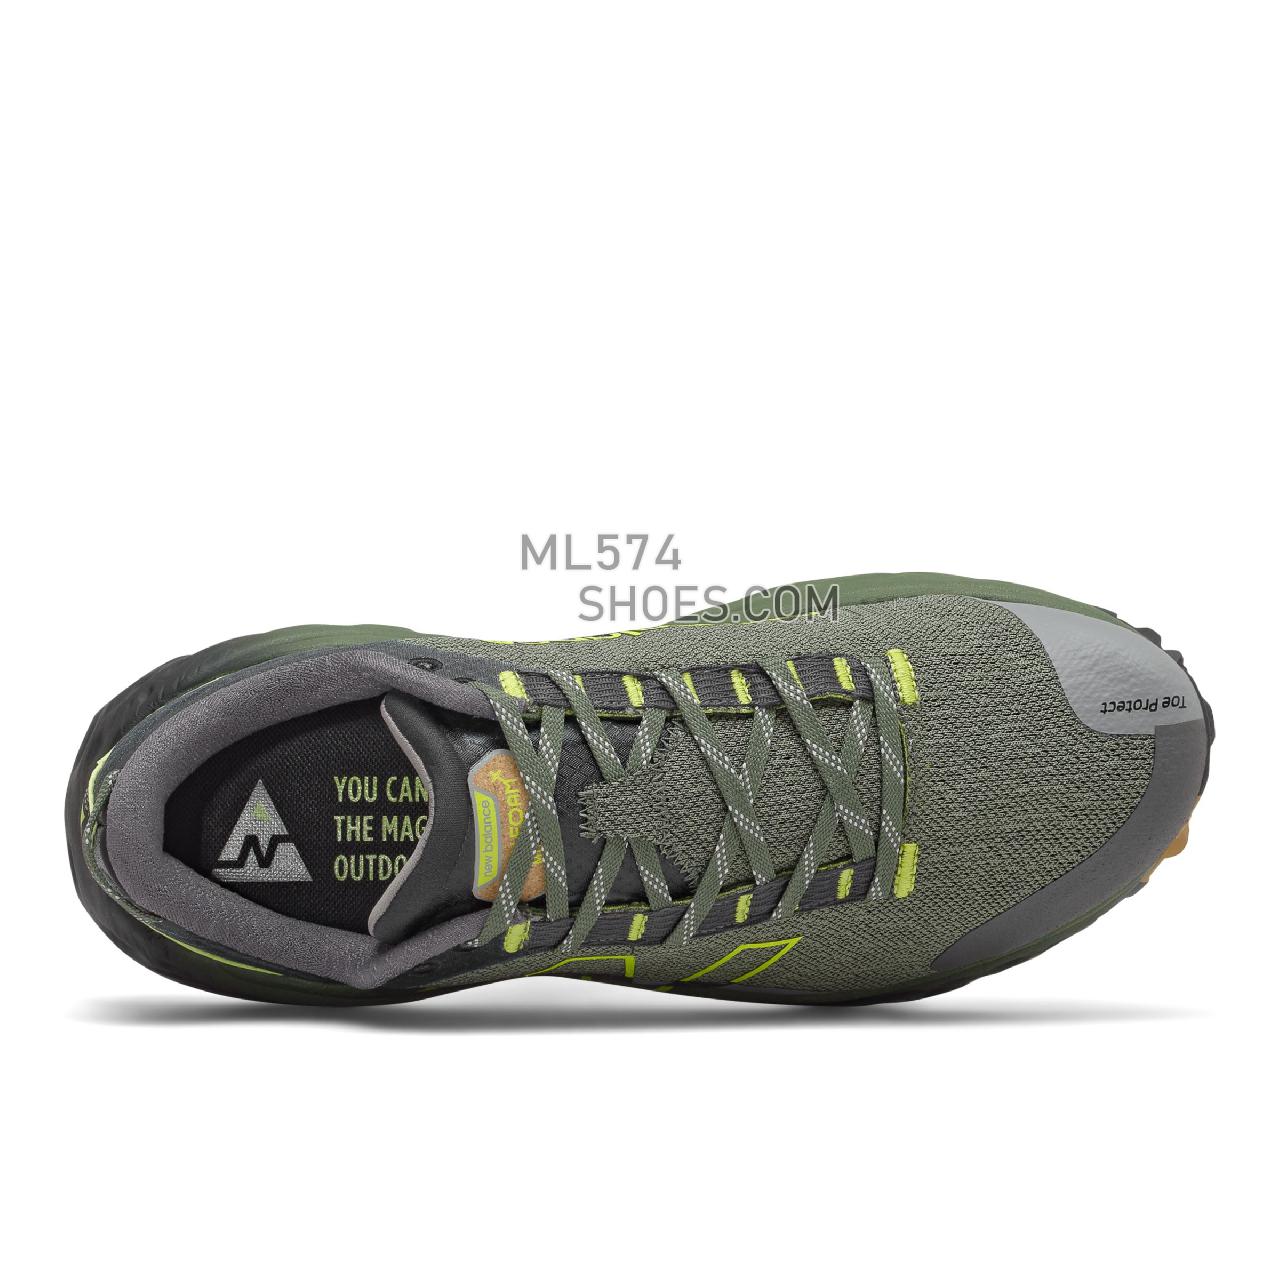 New Balance Fresh Foam X More Trail v2 - Men's Fuelcell Sleek And LightWeight - Norway Spruce with Sulpher Yellow - MTMORLY2